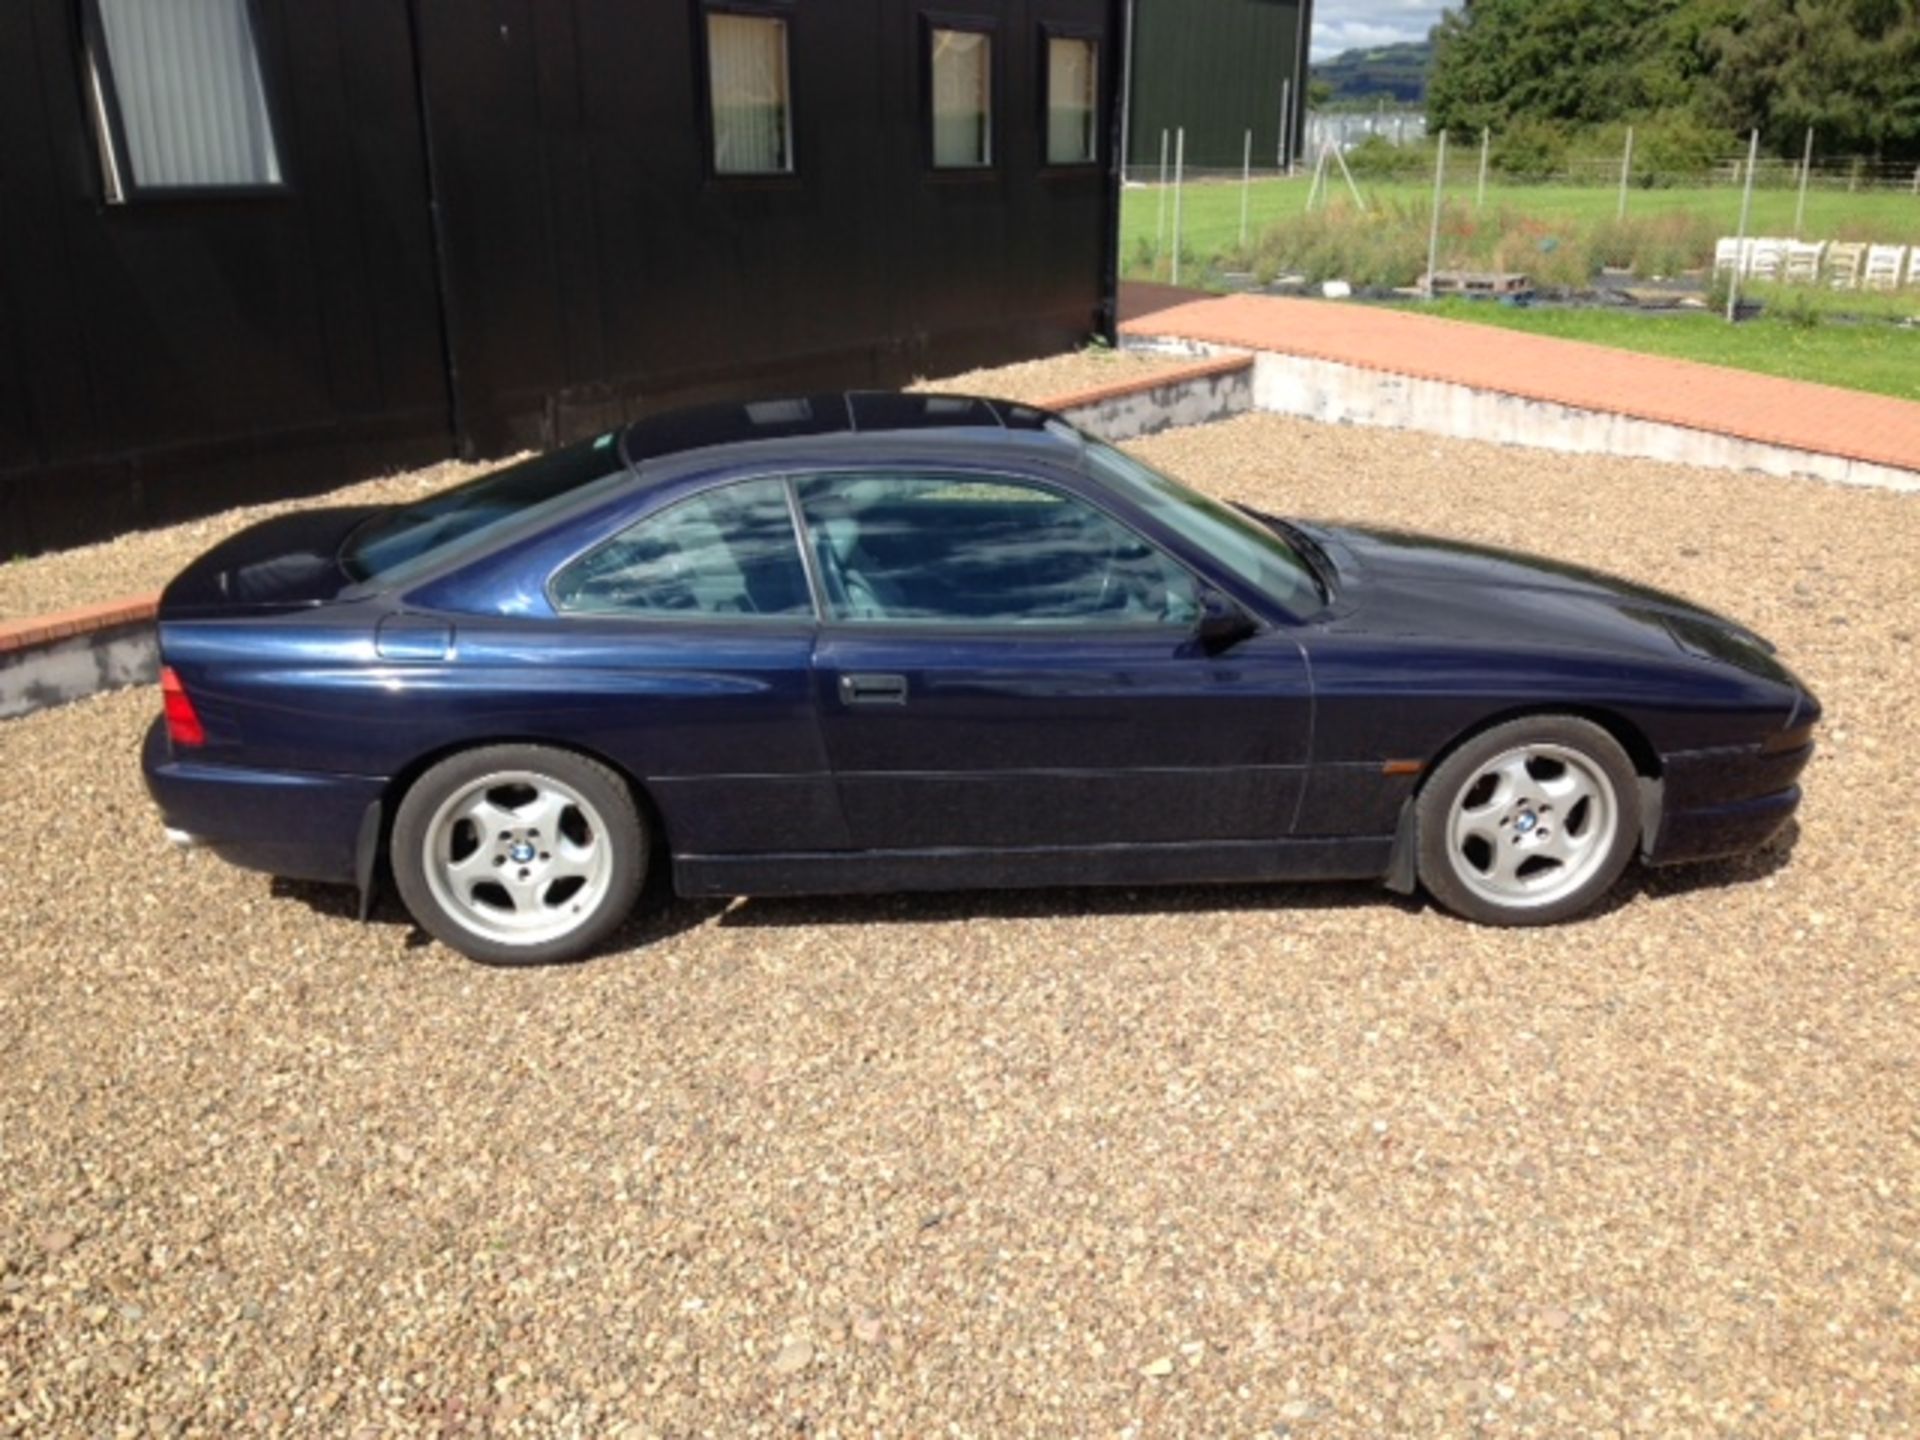 BMW, 840CI AUTO - 4398cc, Chassis number WBAEF82030CC66675 - finished in Orient Blue with Grey - Image 3 of 14